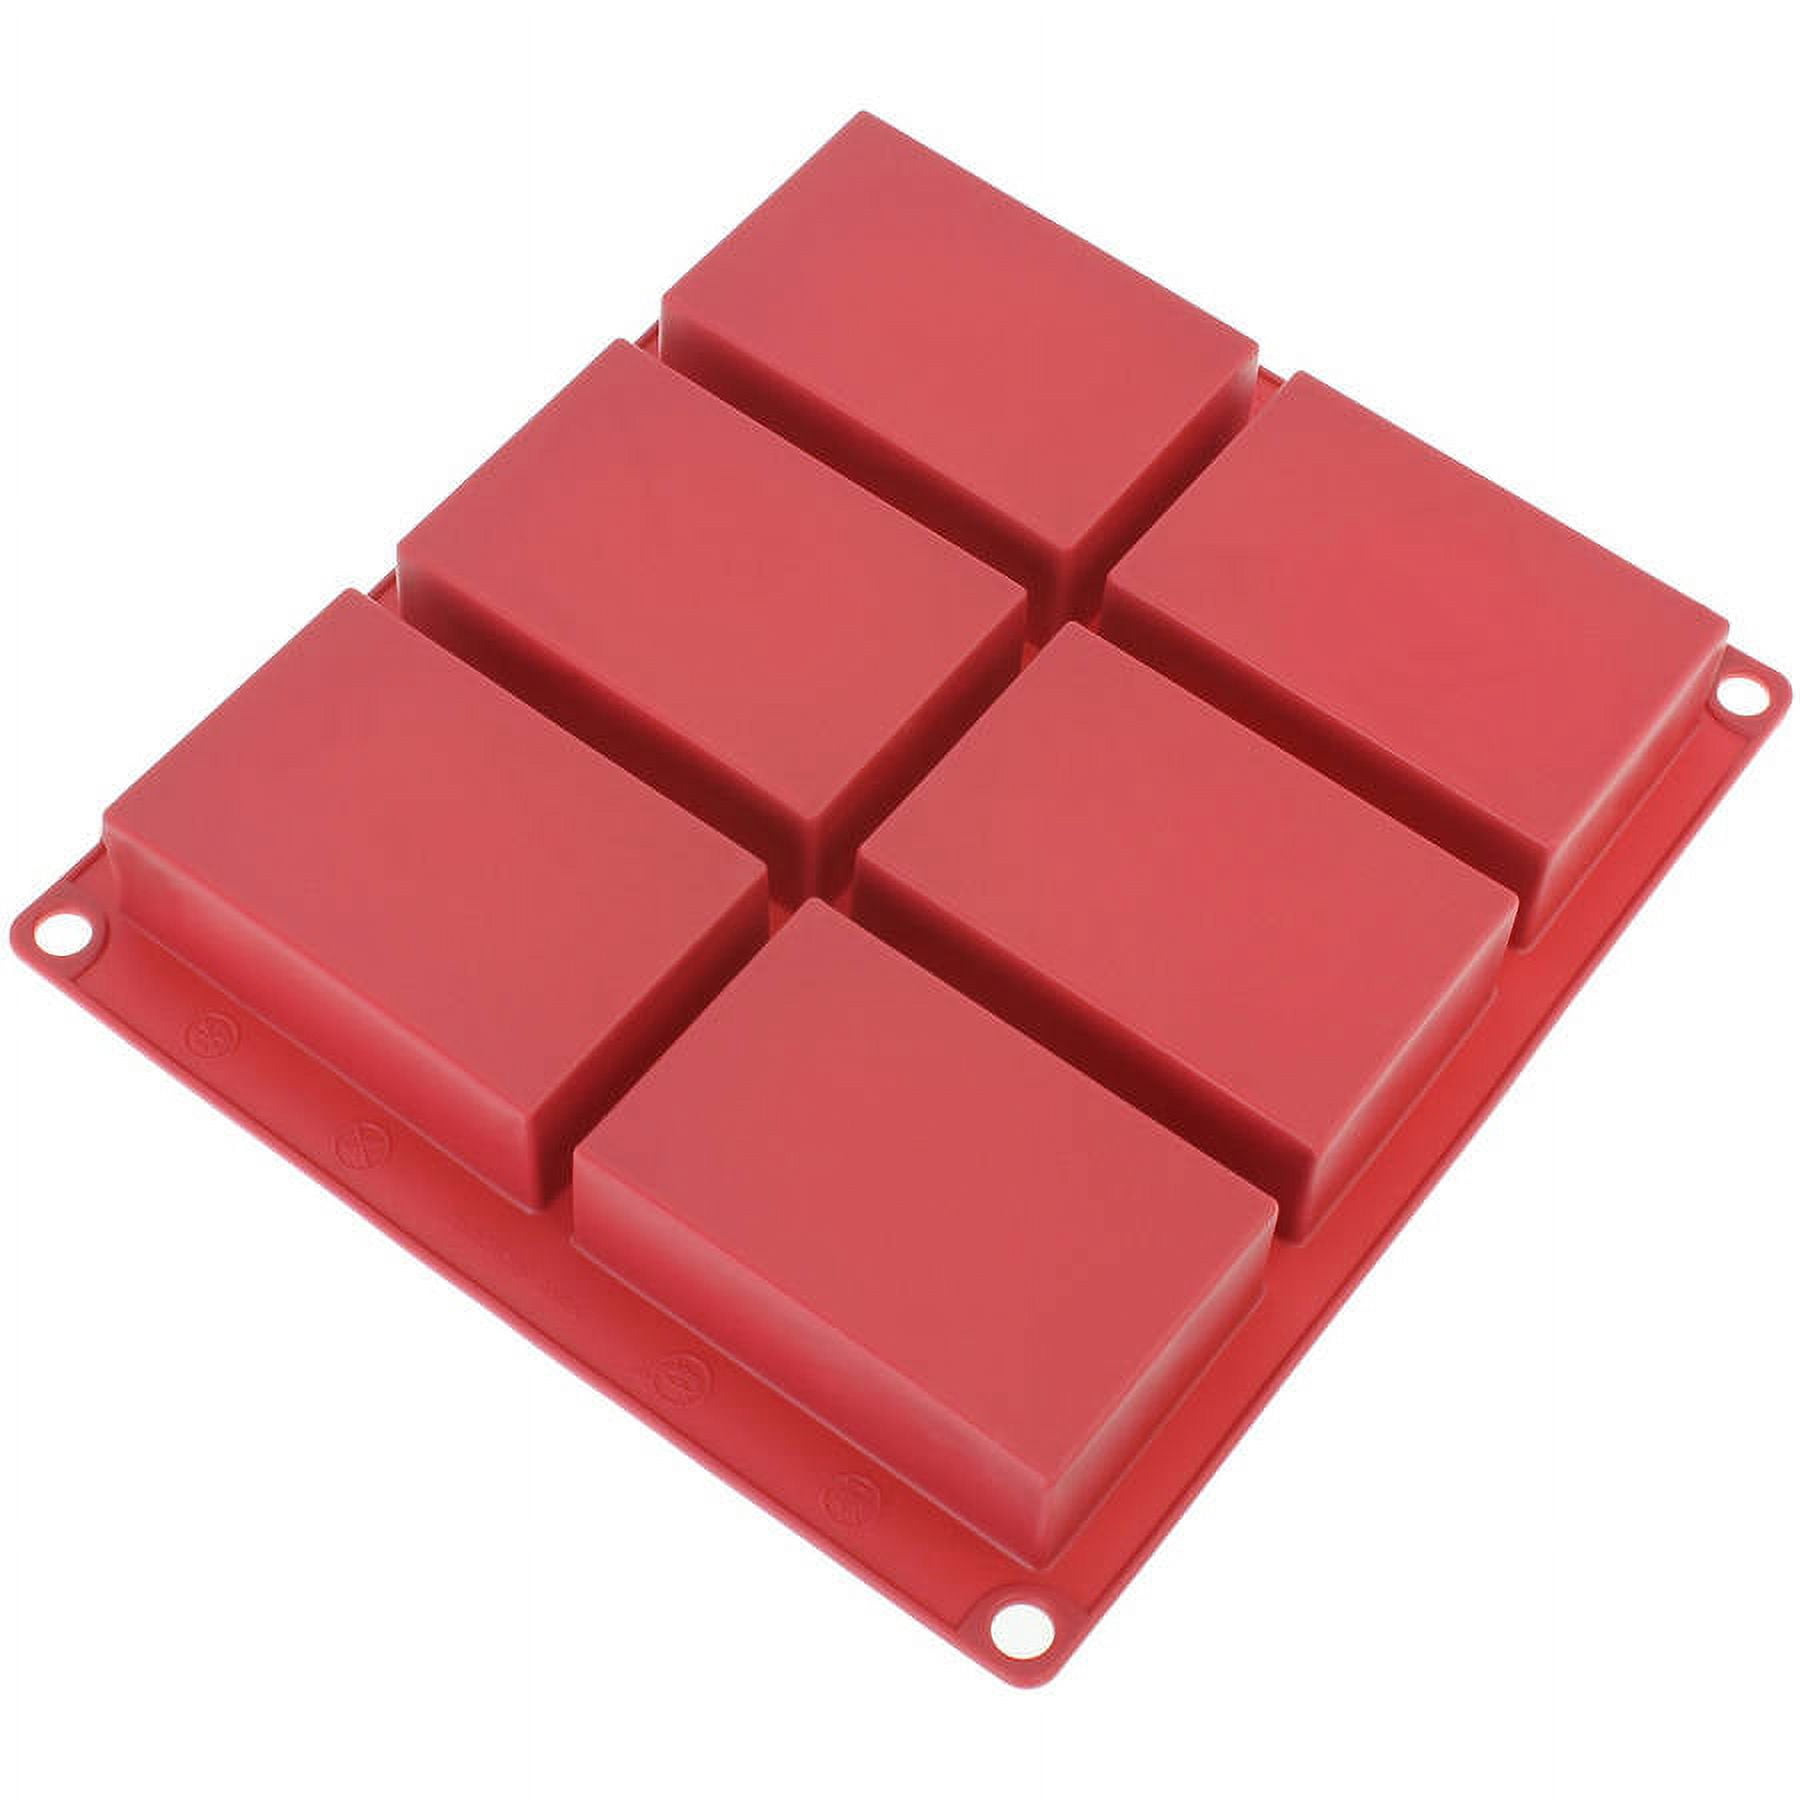 Freshware 6-Cavity Rectangle Soap Bar and Resin Premium Silicone